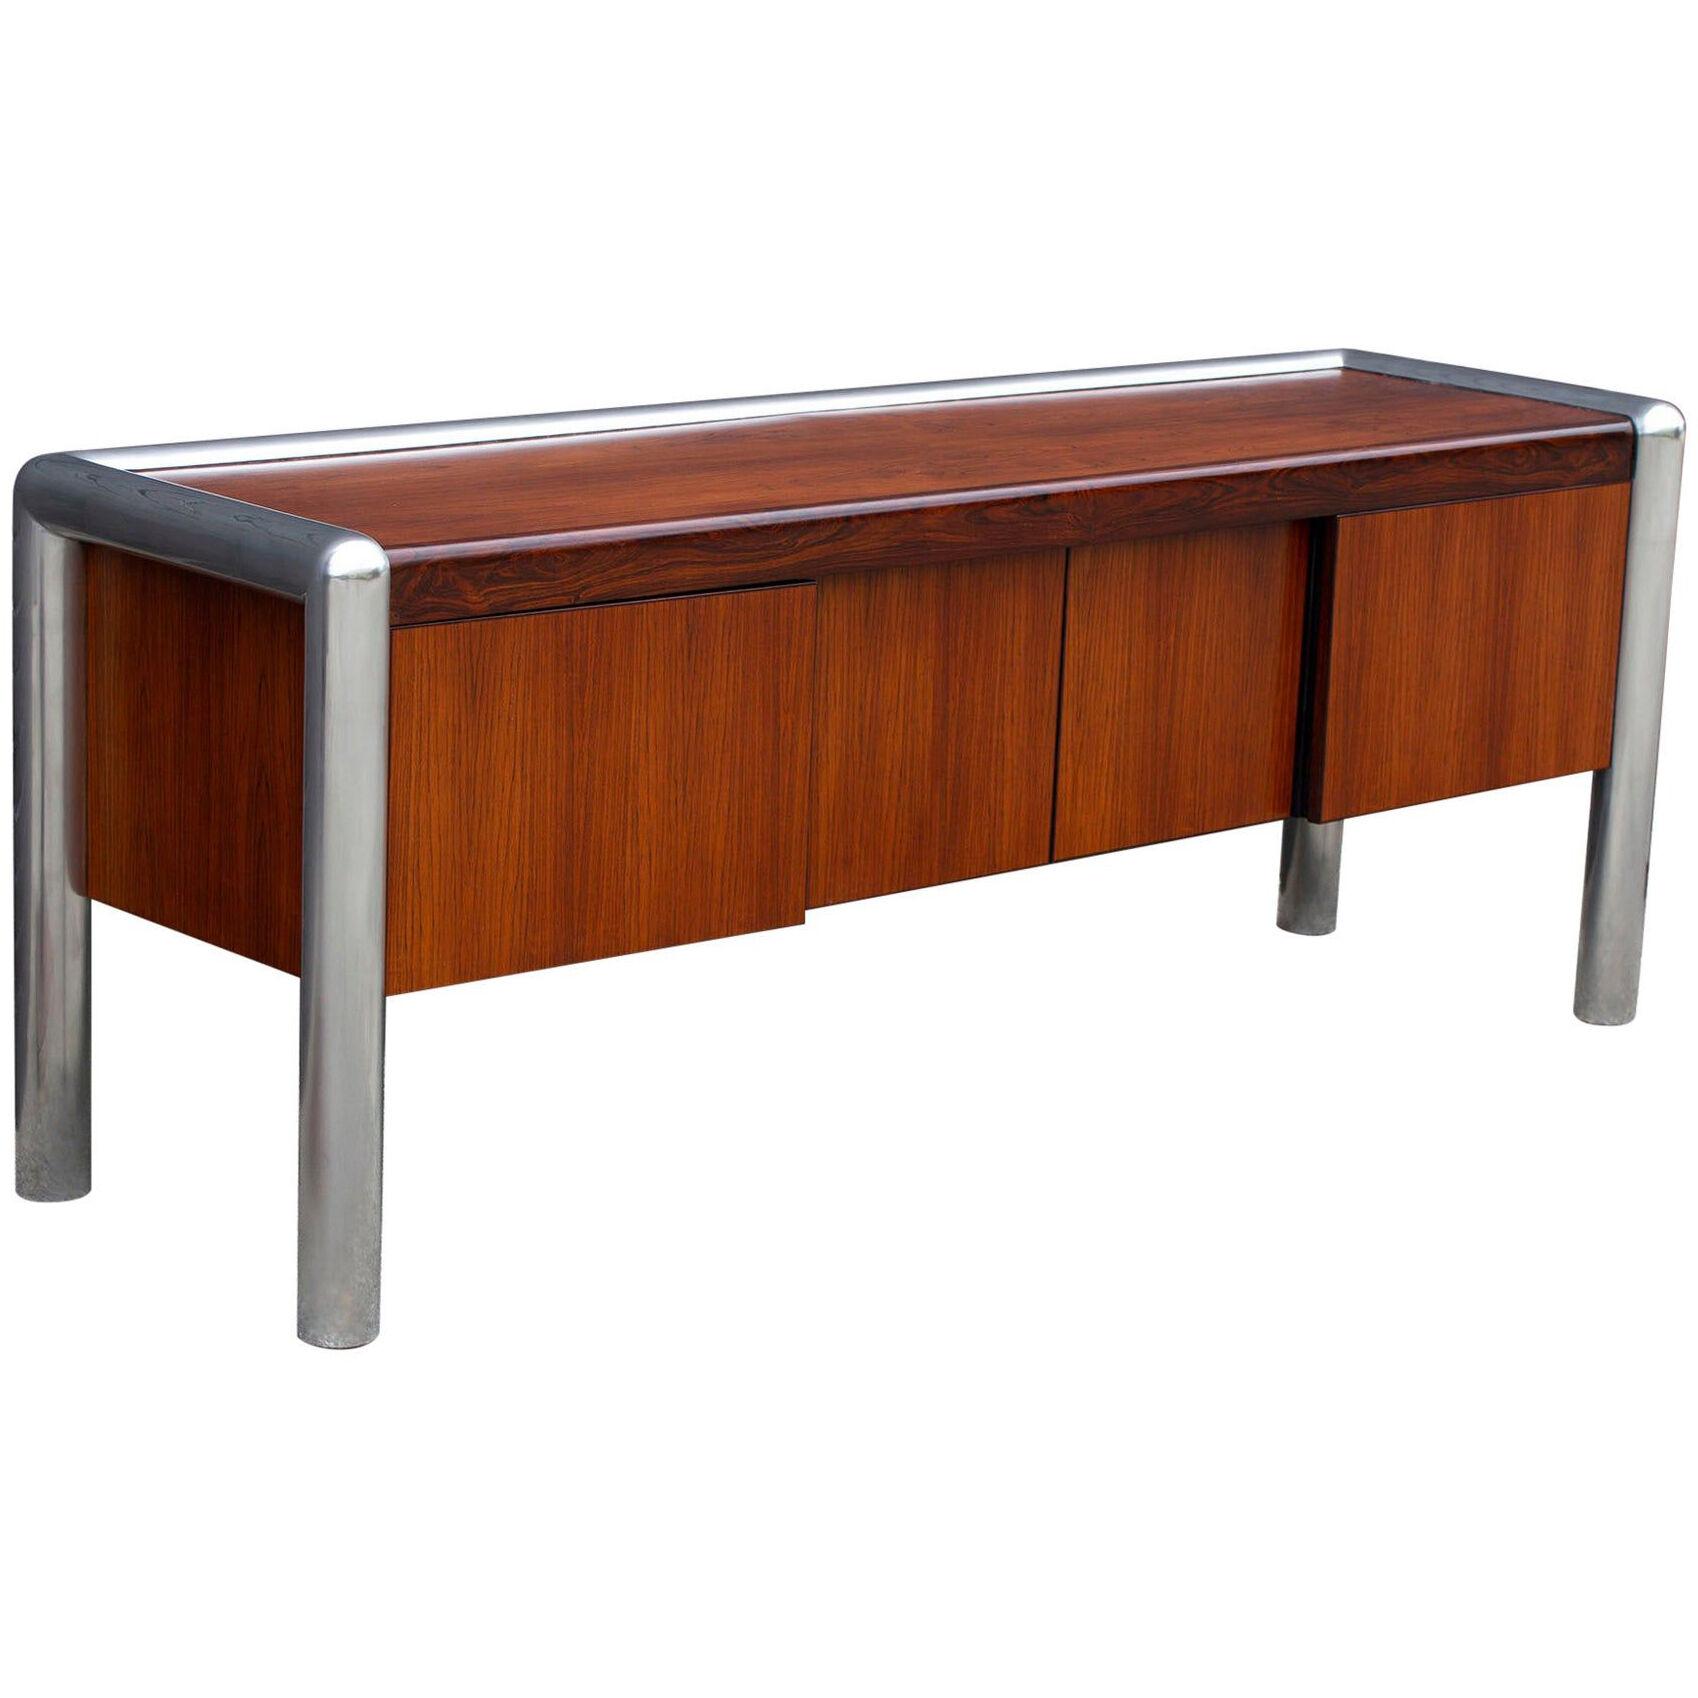 John Mascheroni Rosewood Credenza from the TUBO Series Produced by Vecta, 1970s